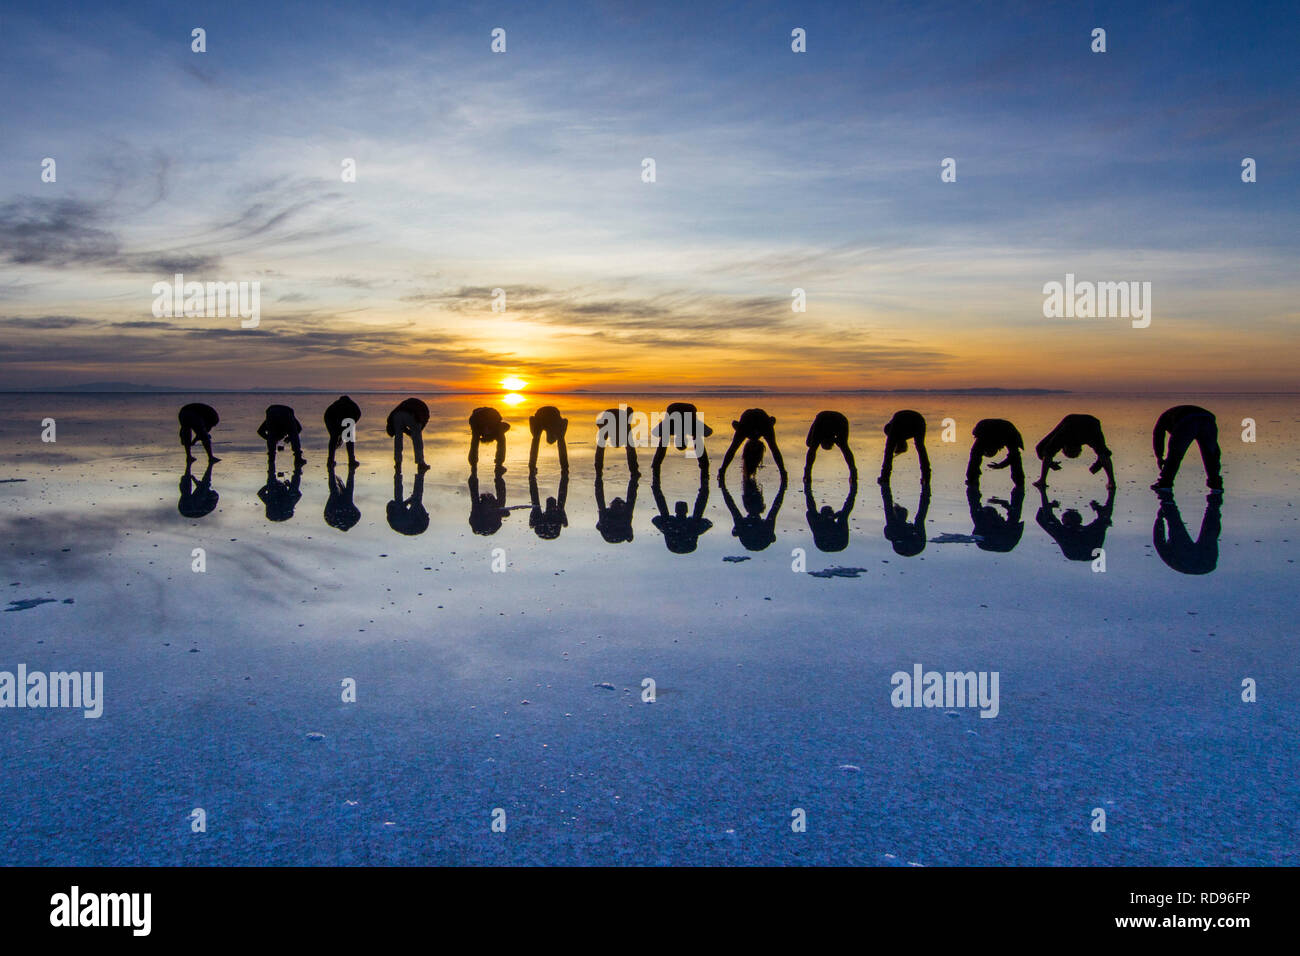 Amazing real people reflections in water at Uyuni Saltflats scenery. People playing with the reflections over the salt lake during a colorful sunrise Stock Photo